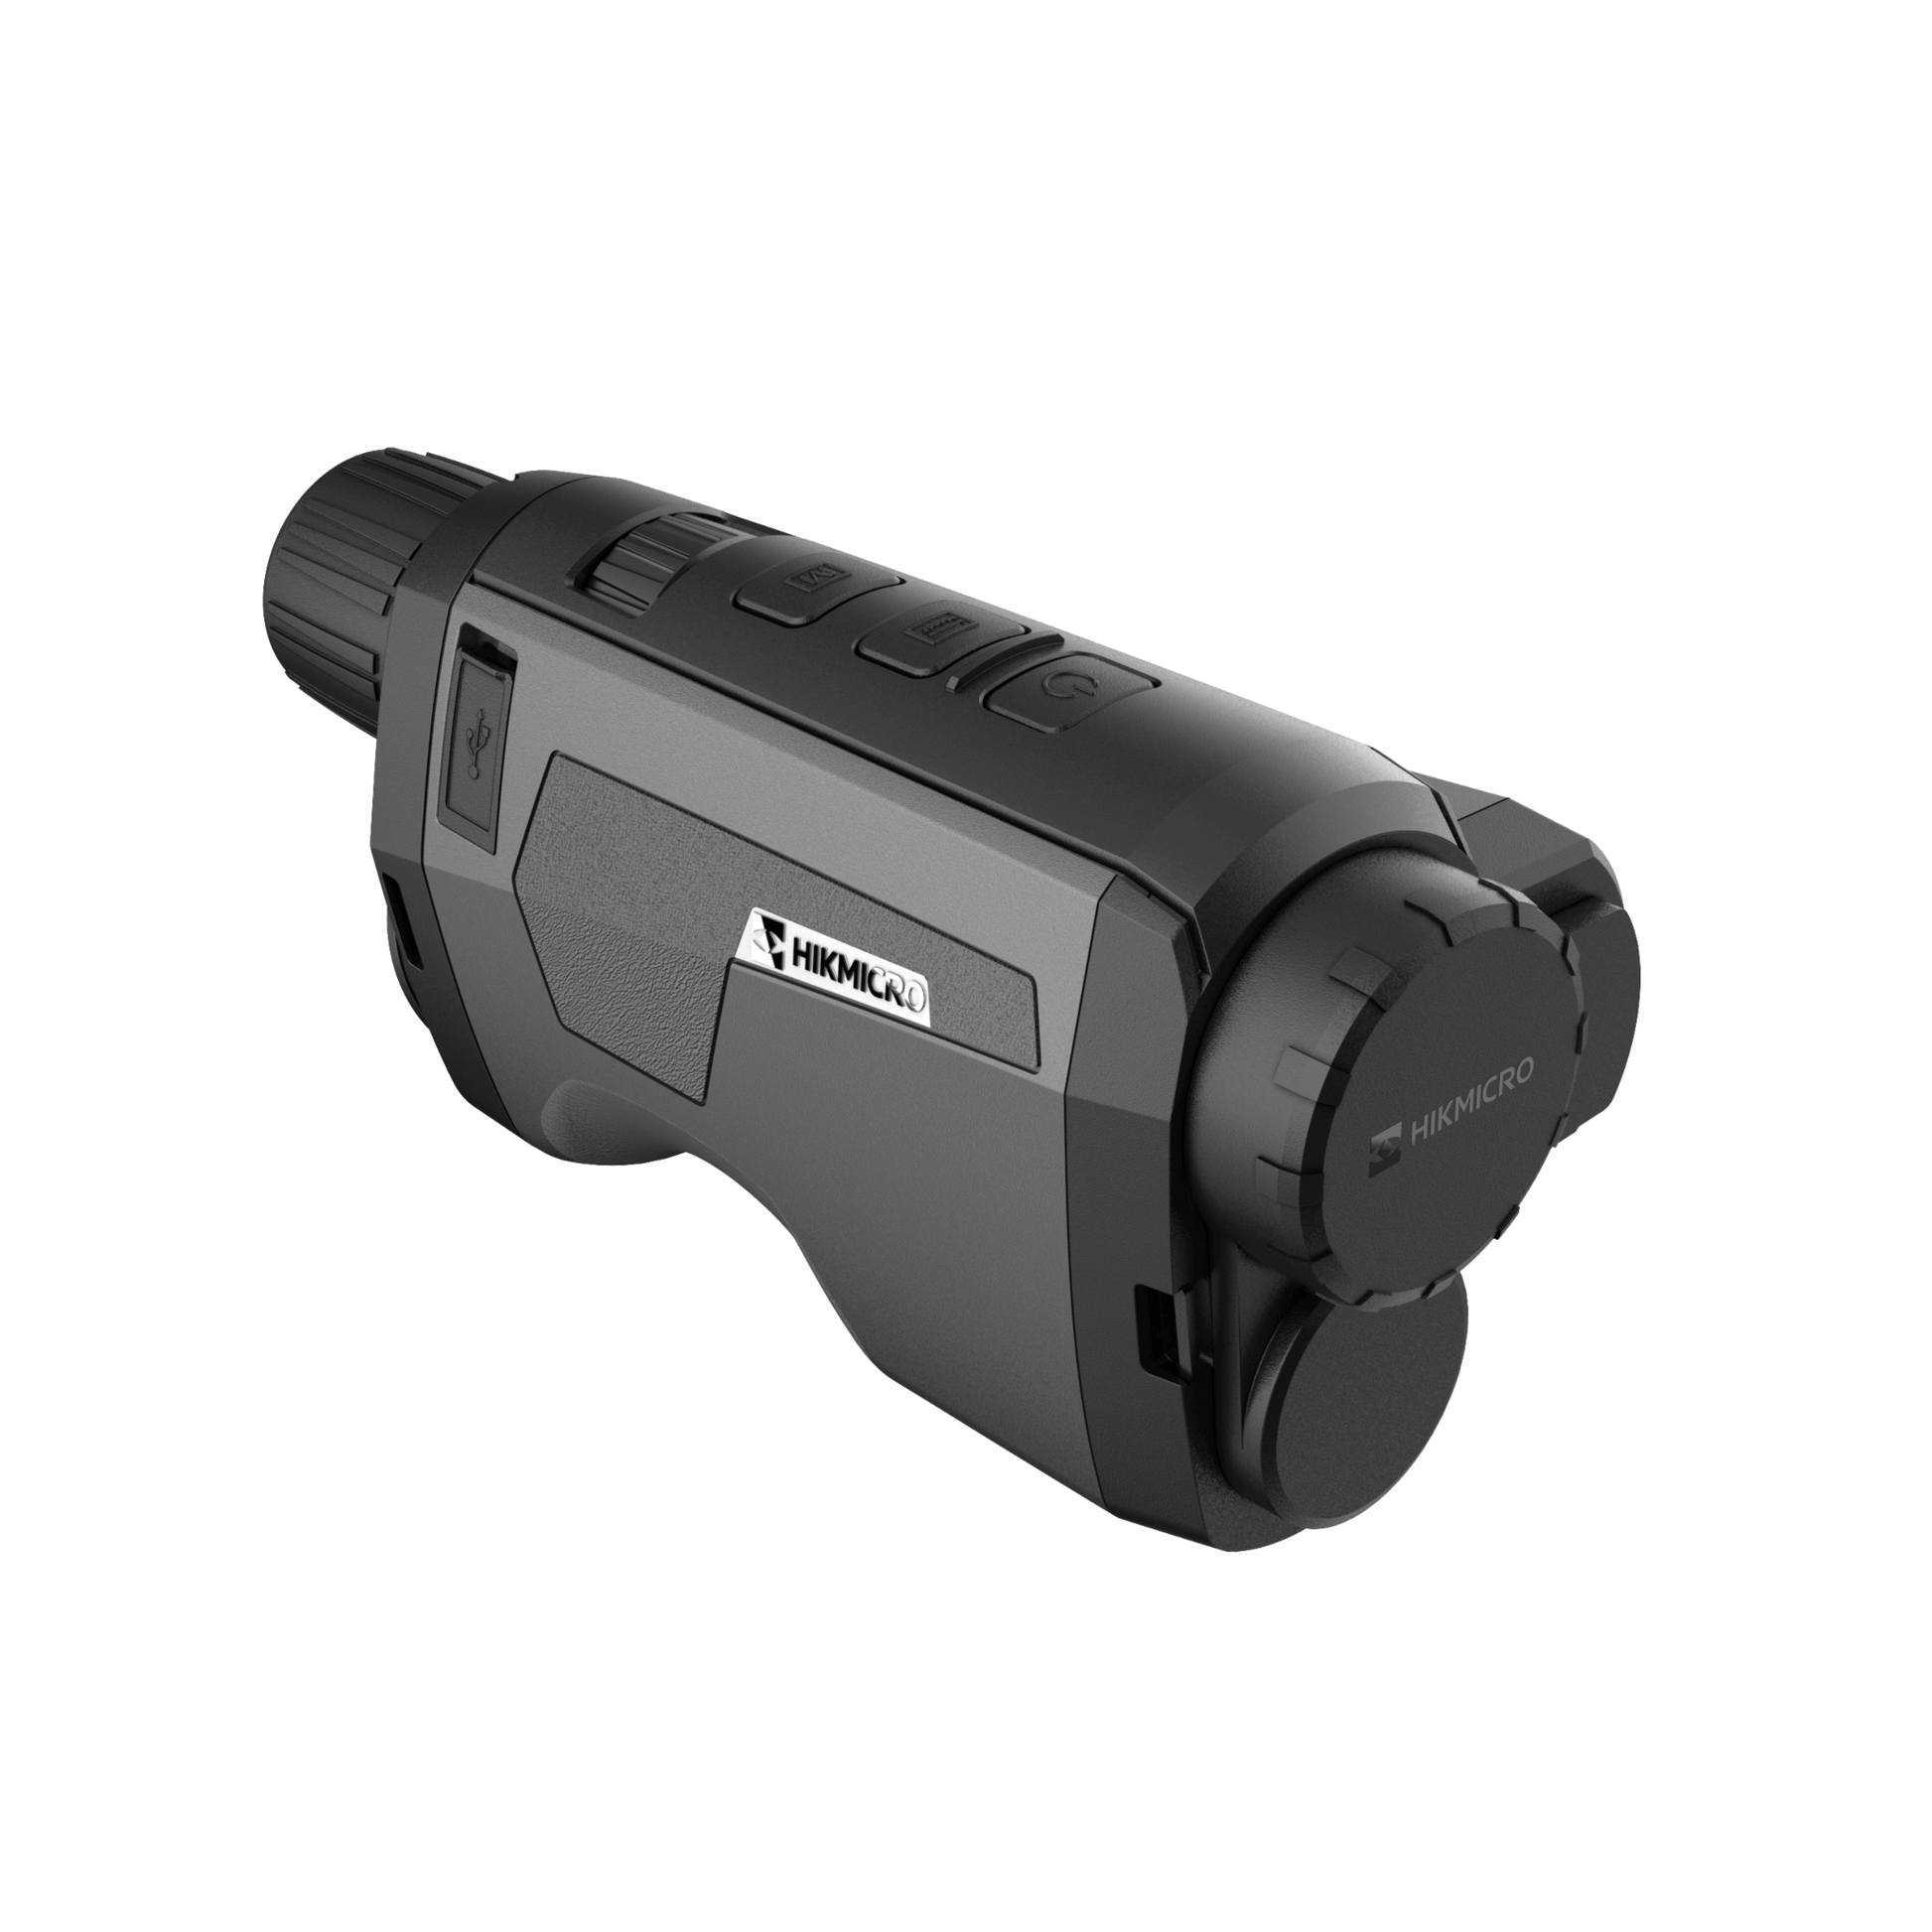 Cape Thermal imaging monocular for sale - HikMicro Gryphon GH25L Handheld thermal monocular front right view with lens cap fitted